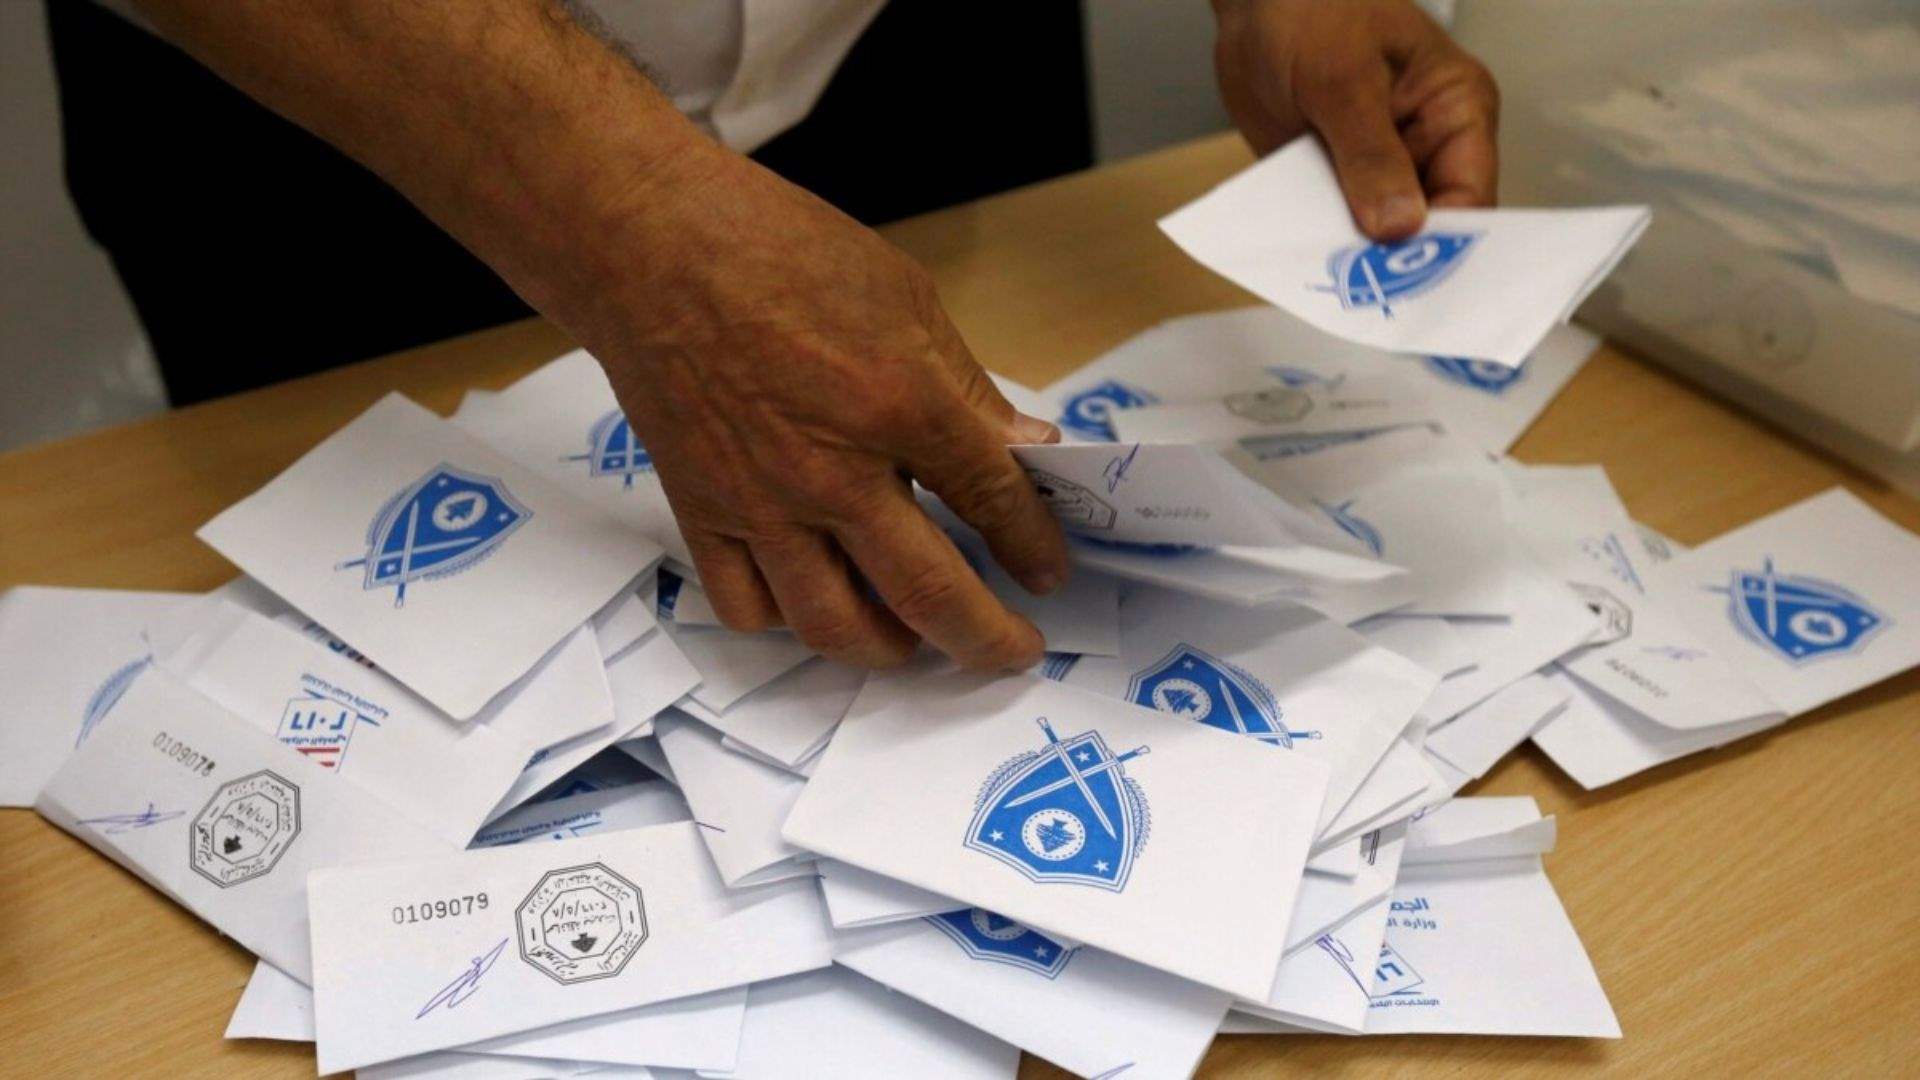 Lebanese municipal elections could face delays due to missing presidential signature on decree